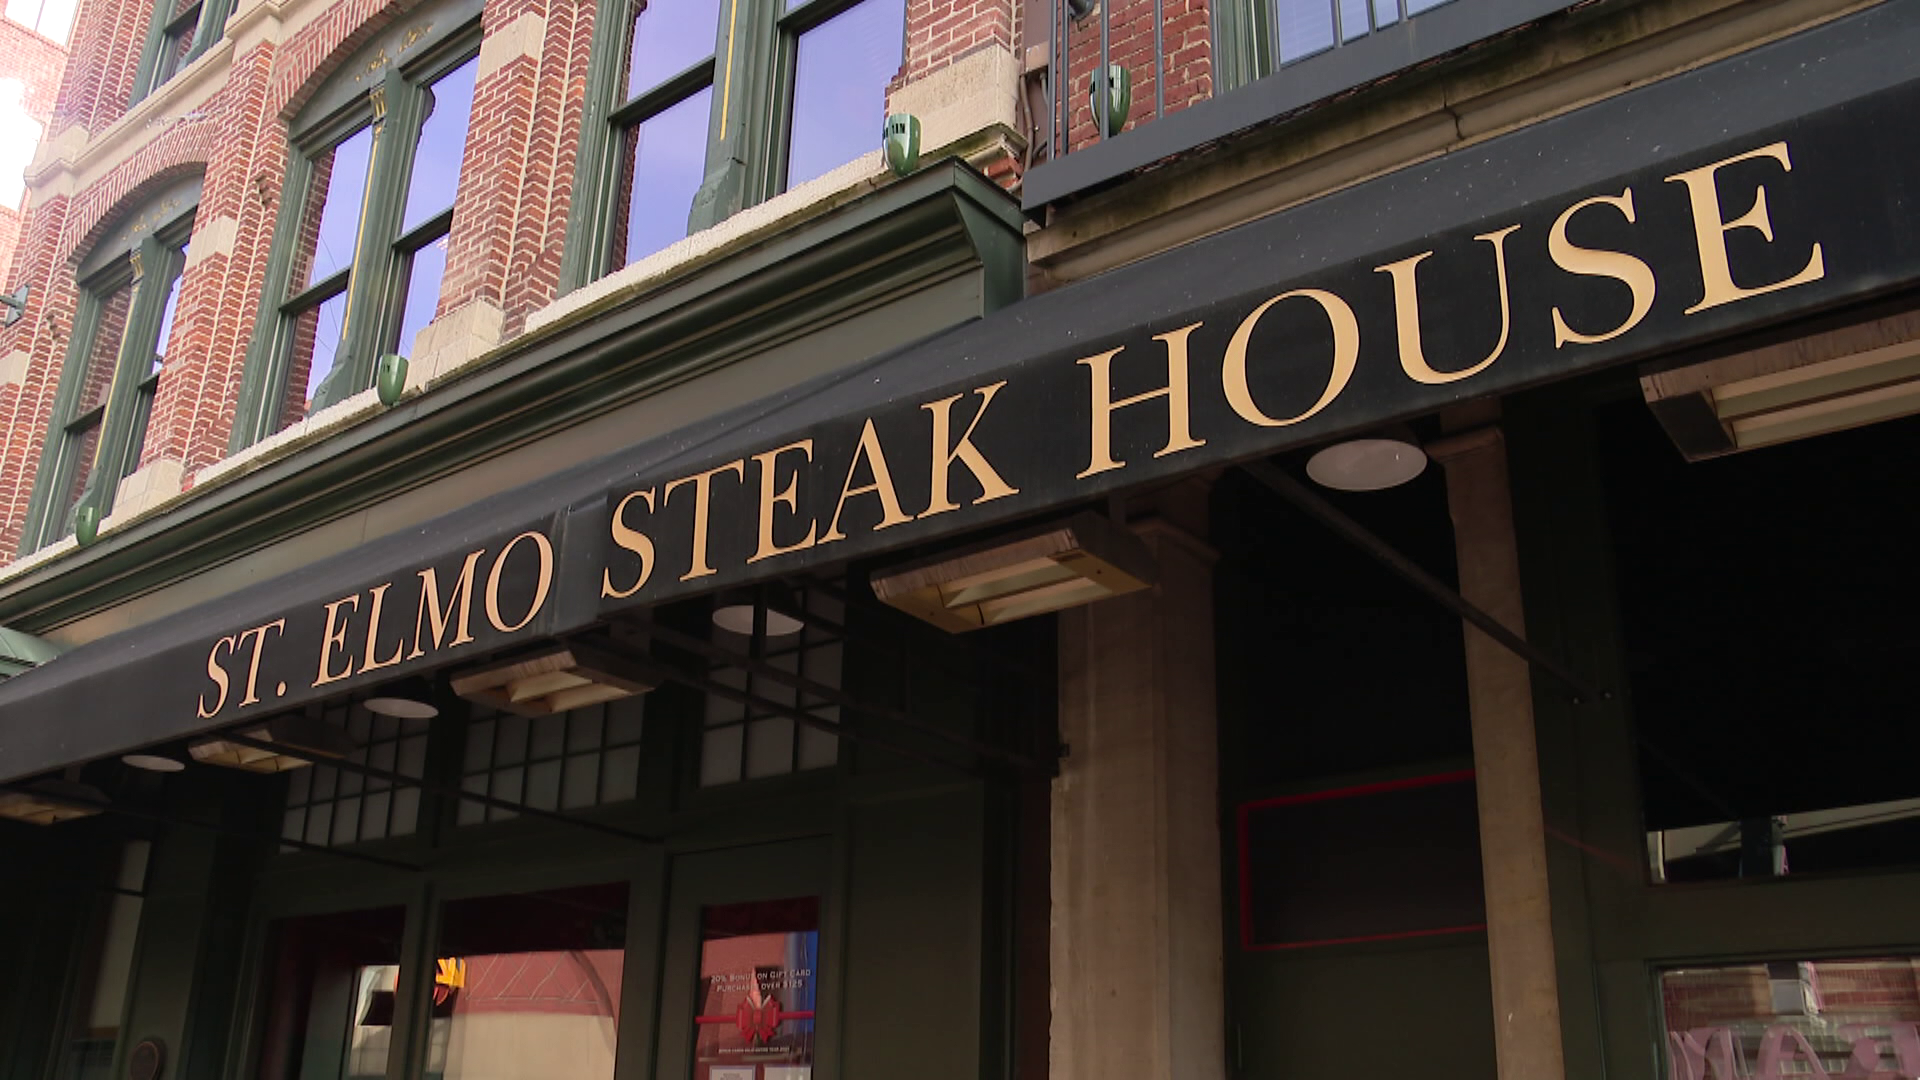 The steak house closed early Saturday to be professionally deep cleaned after nine employees tested positive for COVID-19.